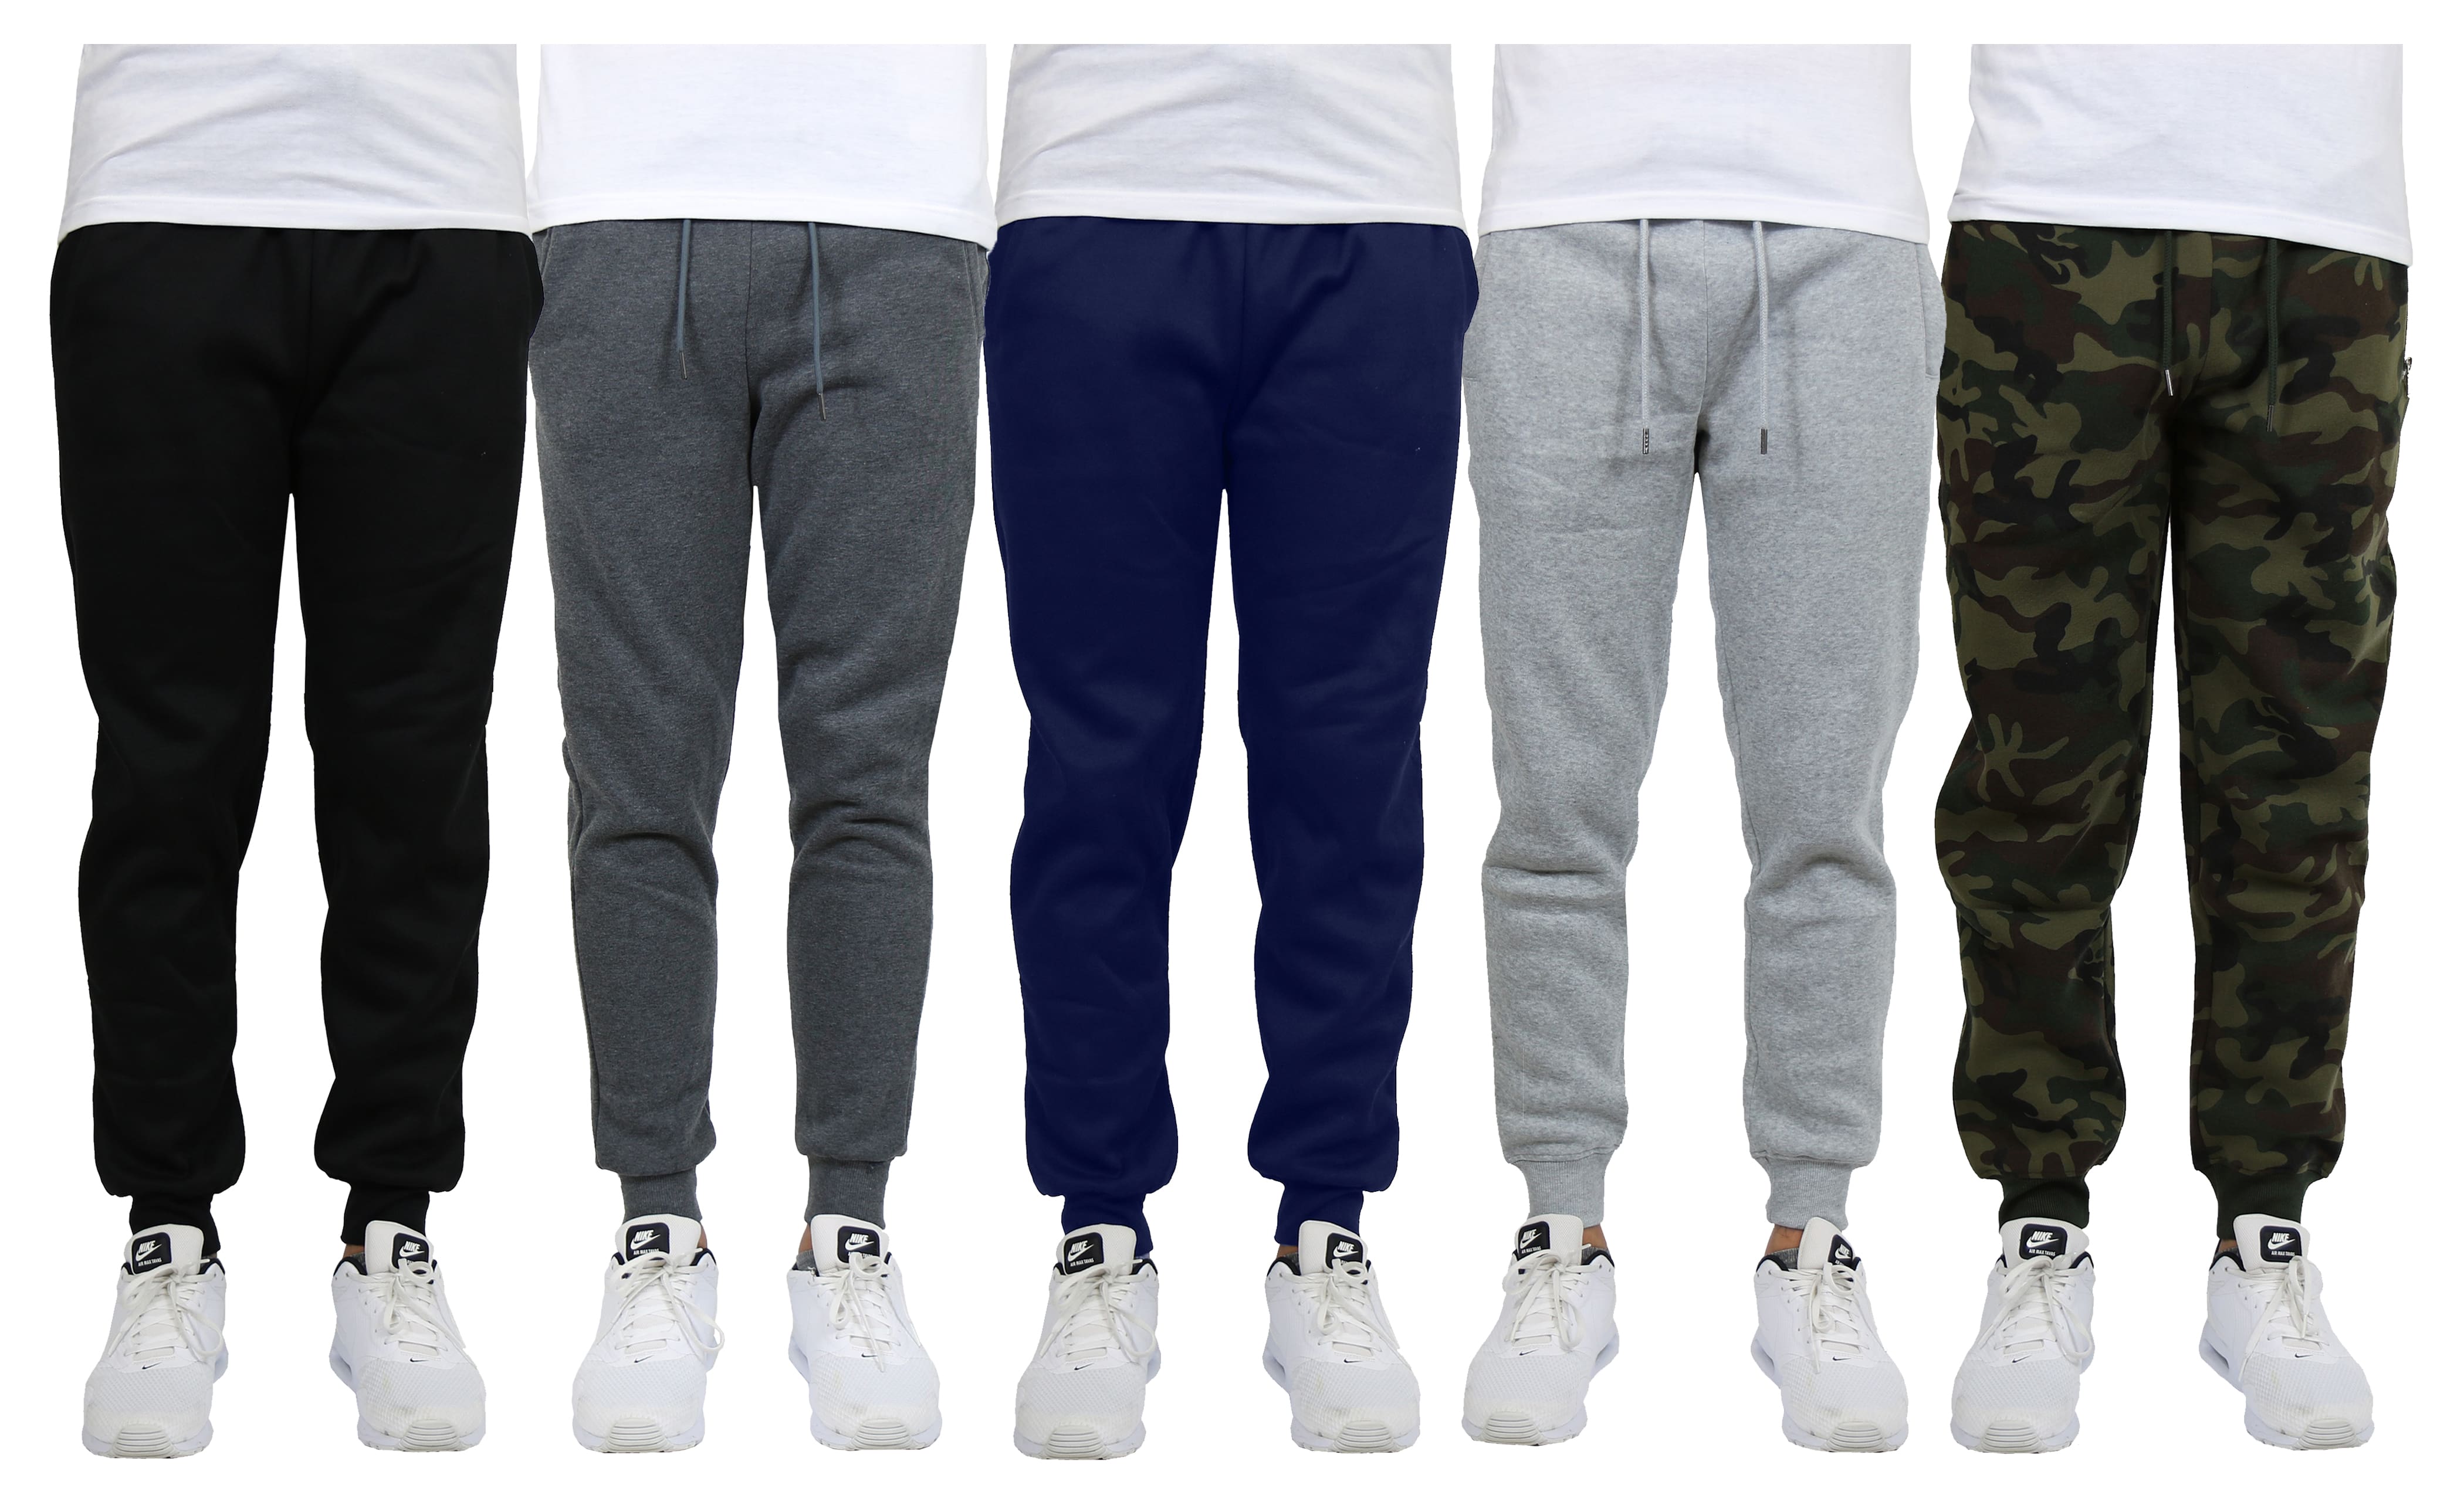 Galaxy by Harvic Fleece-Lined Men's Jogger Sweatpants 5 Pack